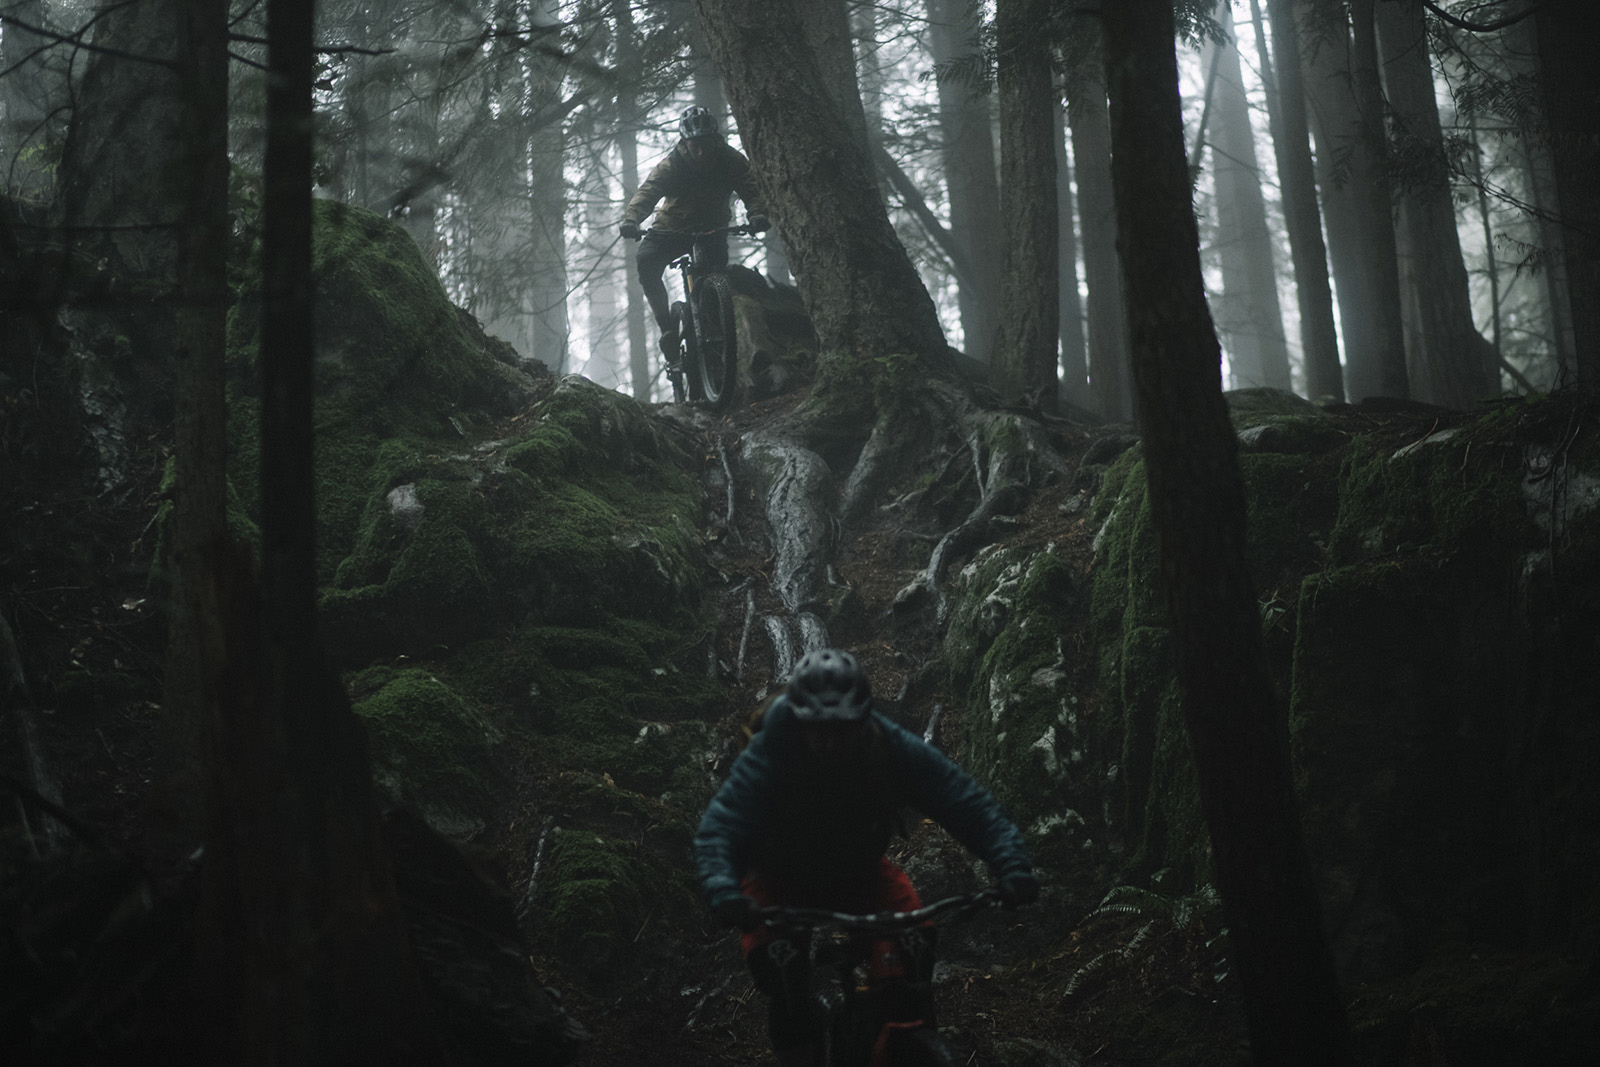 Thomas Vanderham rides with Wade Simmons This is home in Vancouver British Columbia Canada